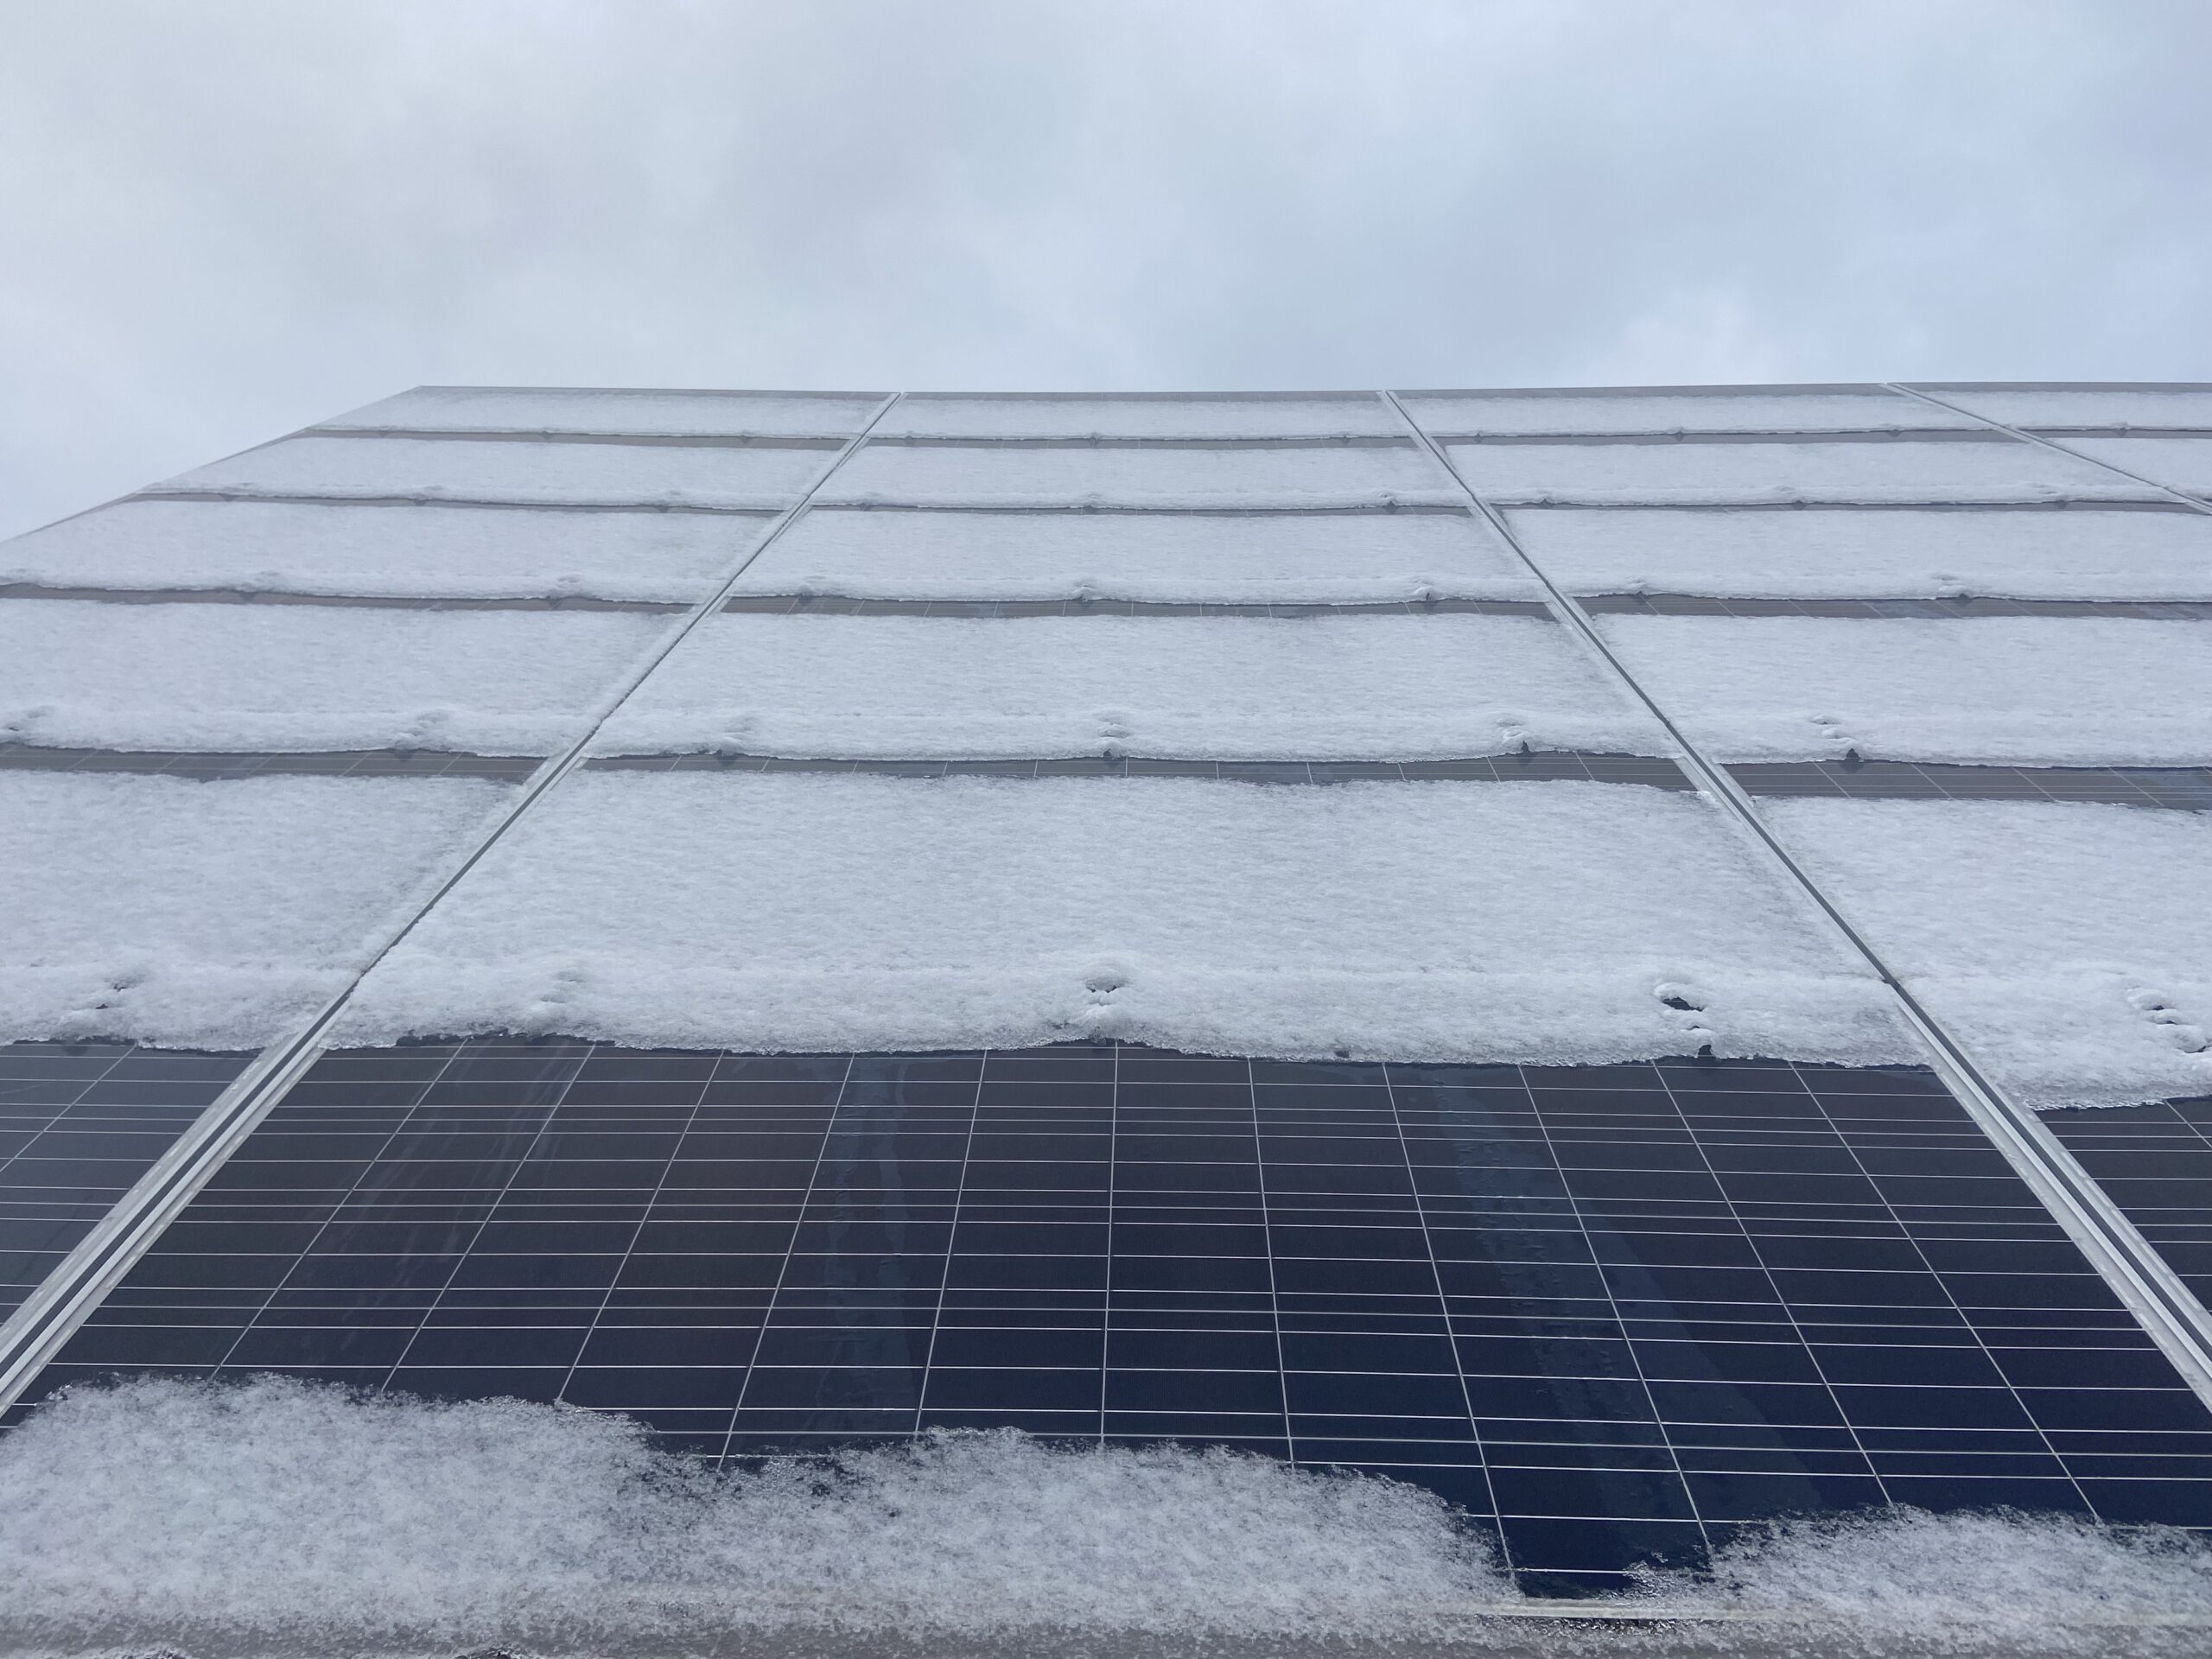 A snow-covered 240 solar panel array alongside the North Liberty Streets Department, installed by Moxie Solar. CREDIT NOAH TONG